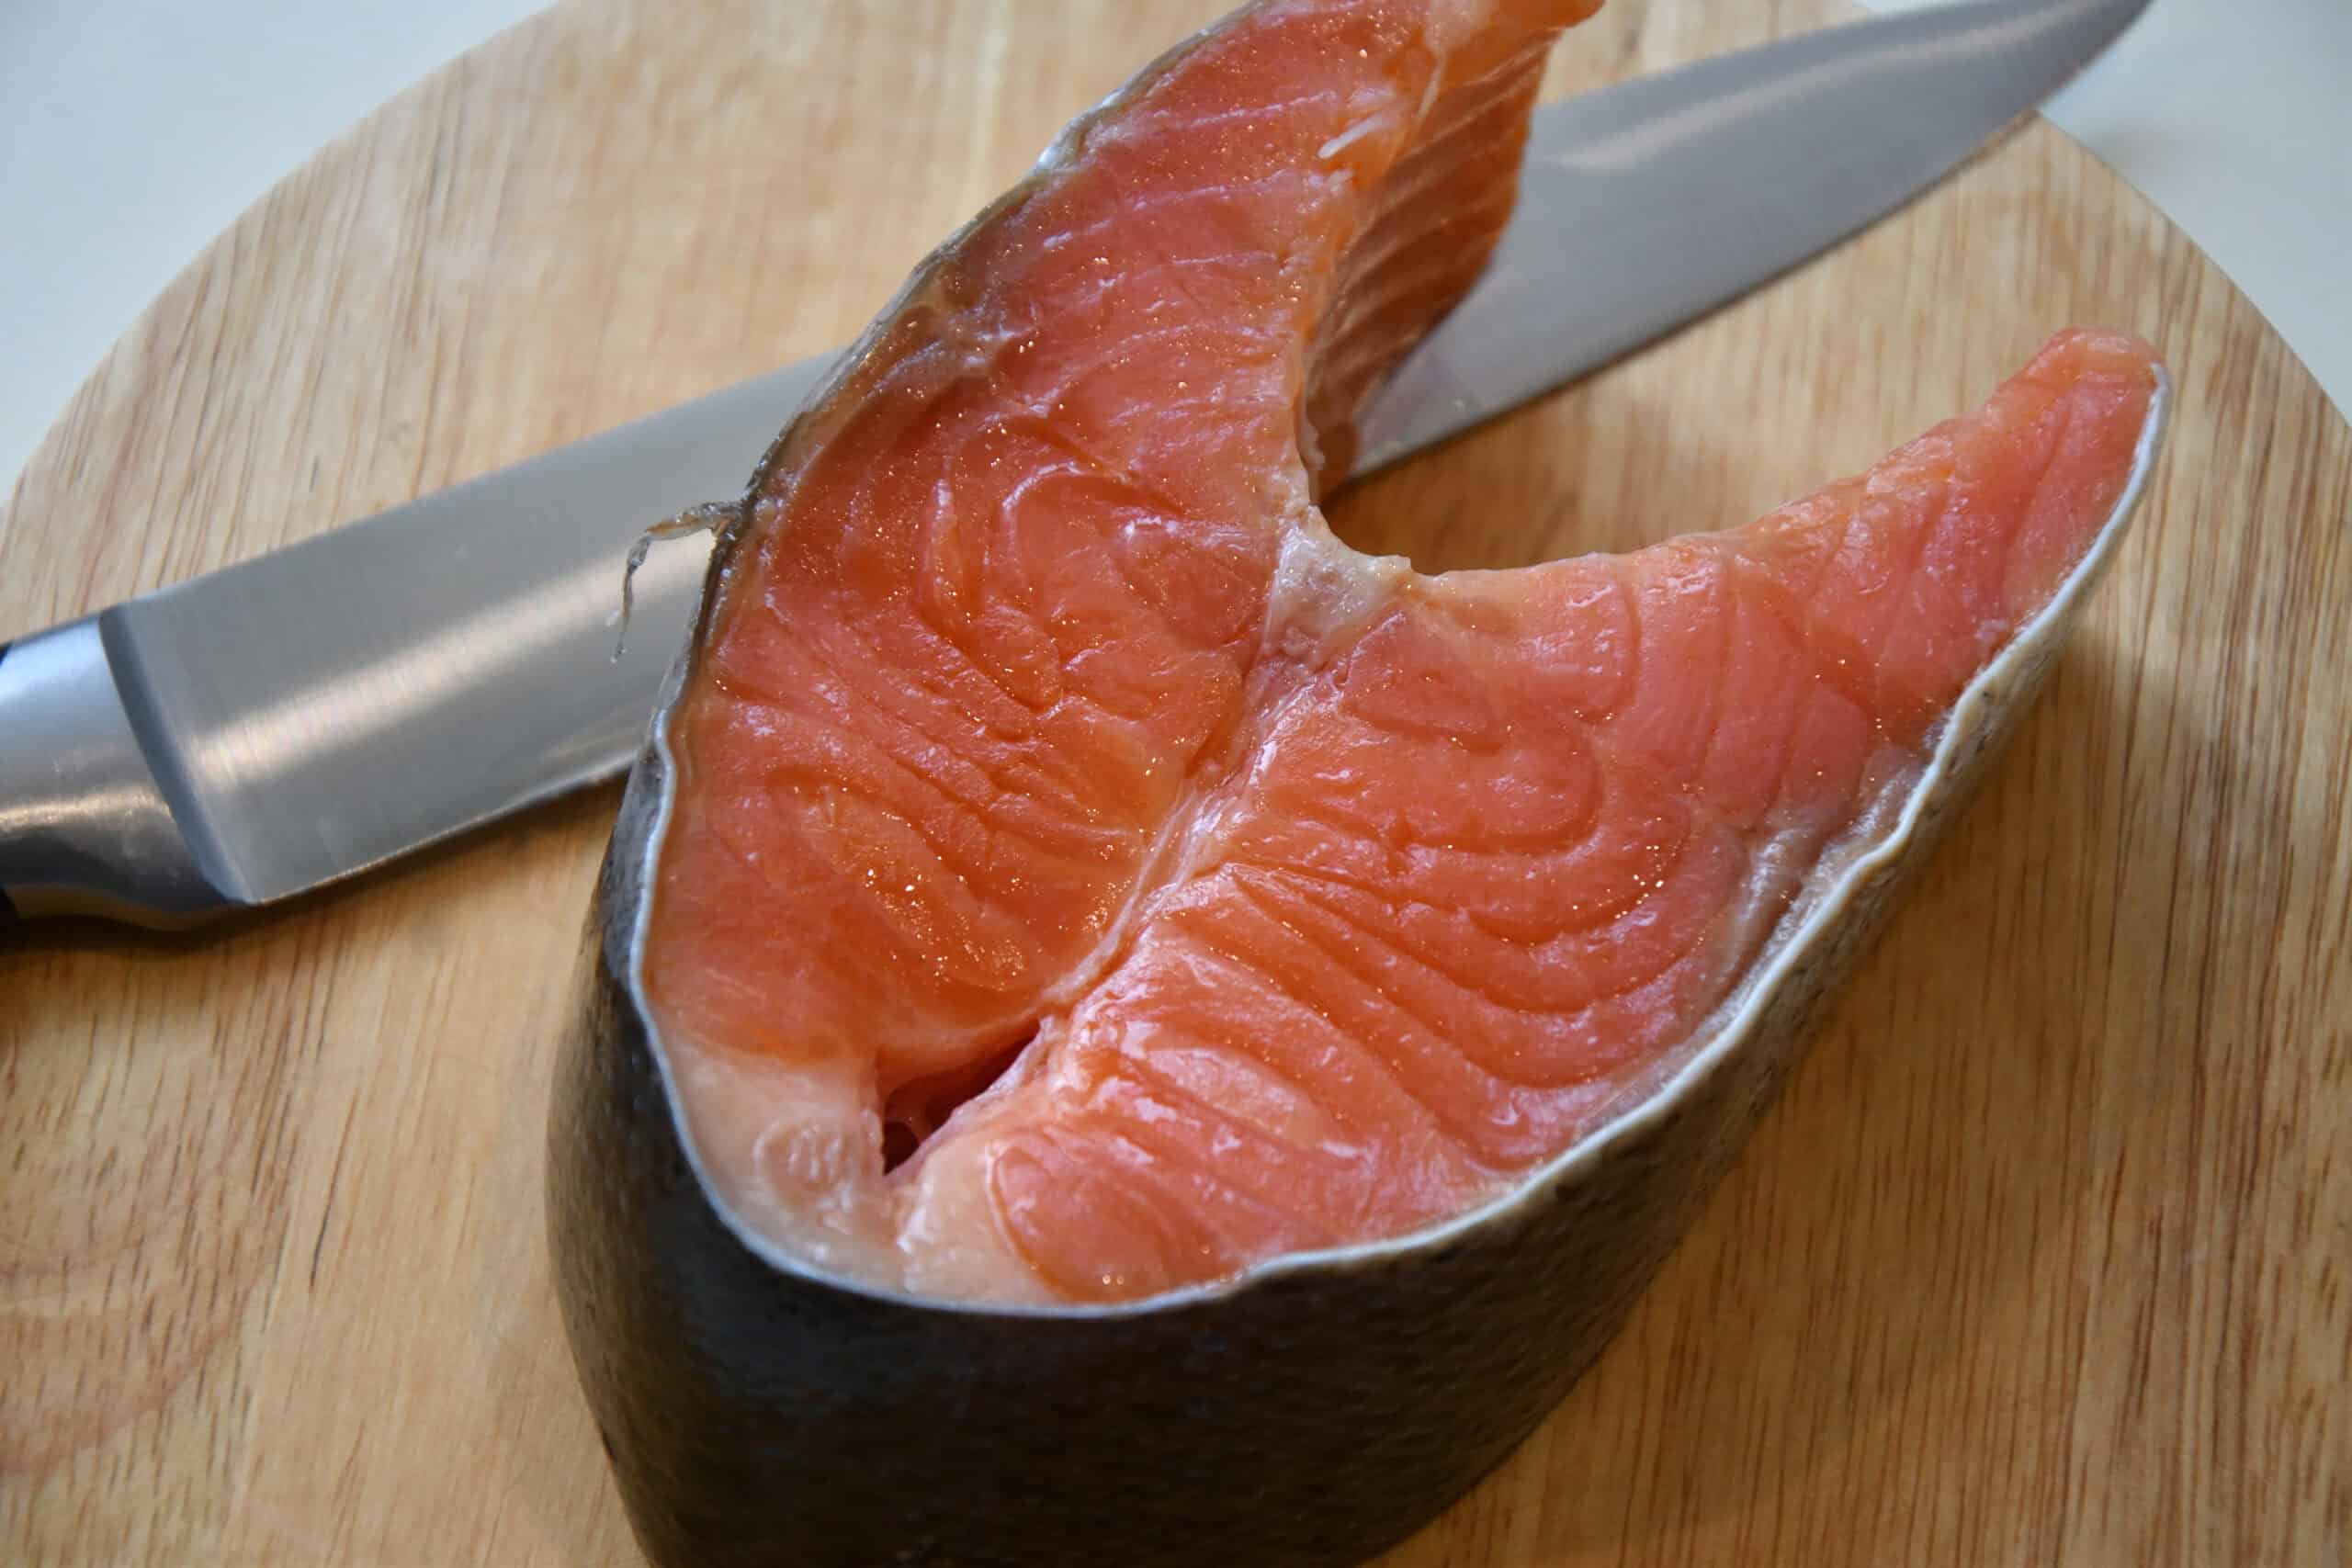 a king salmon filet on a round wooden cutting board next to a carving knife.